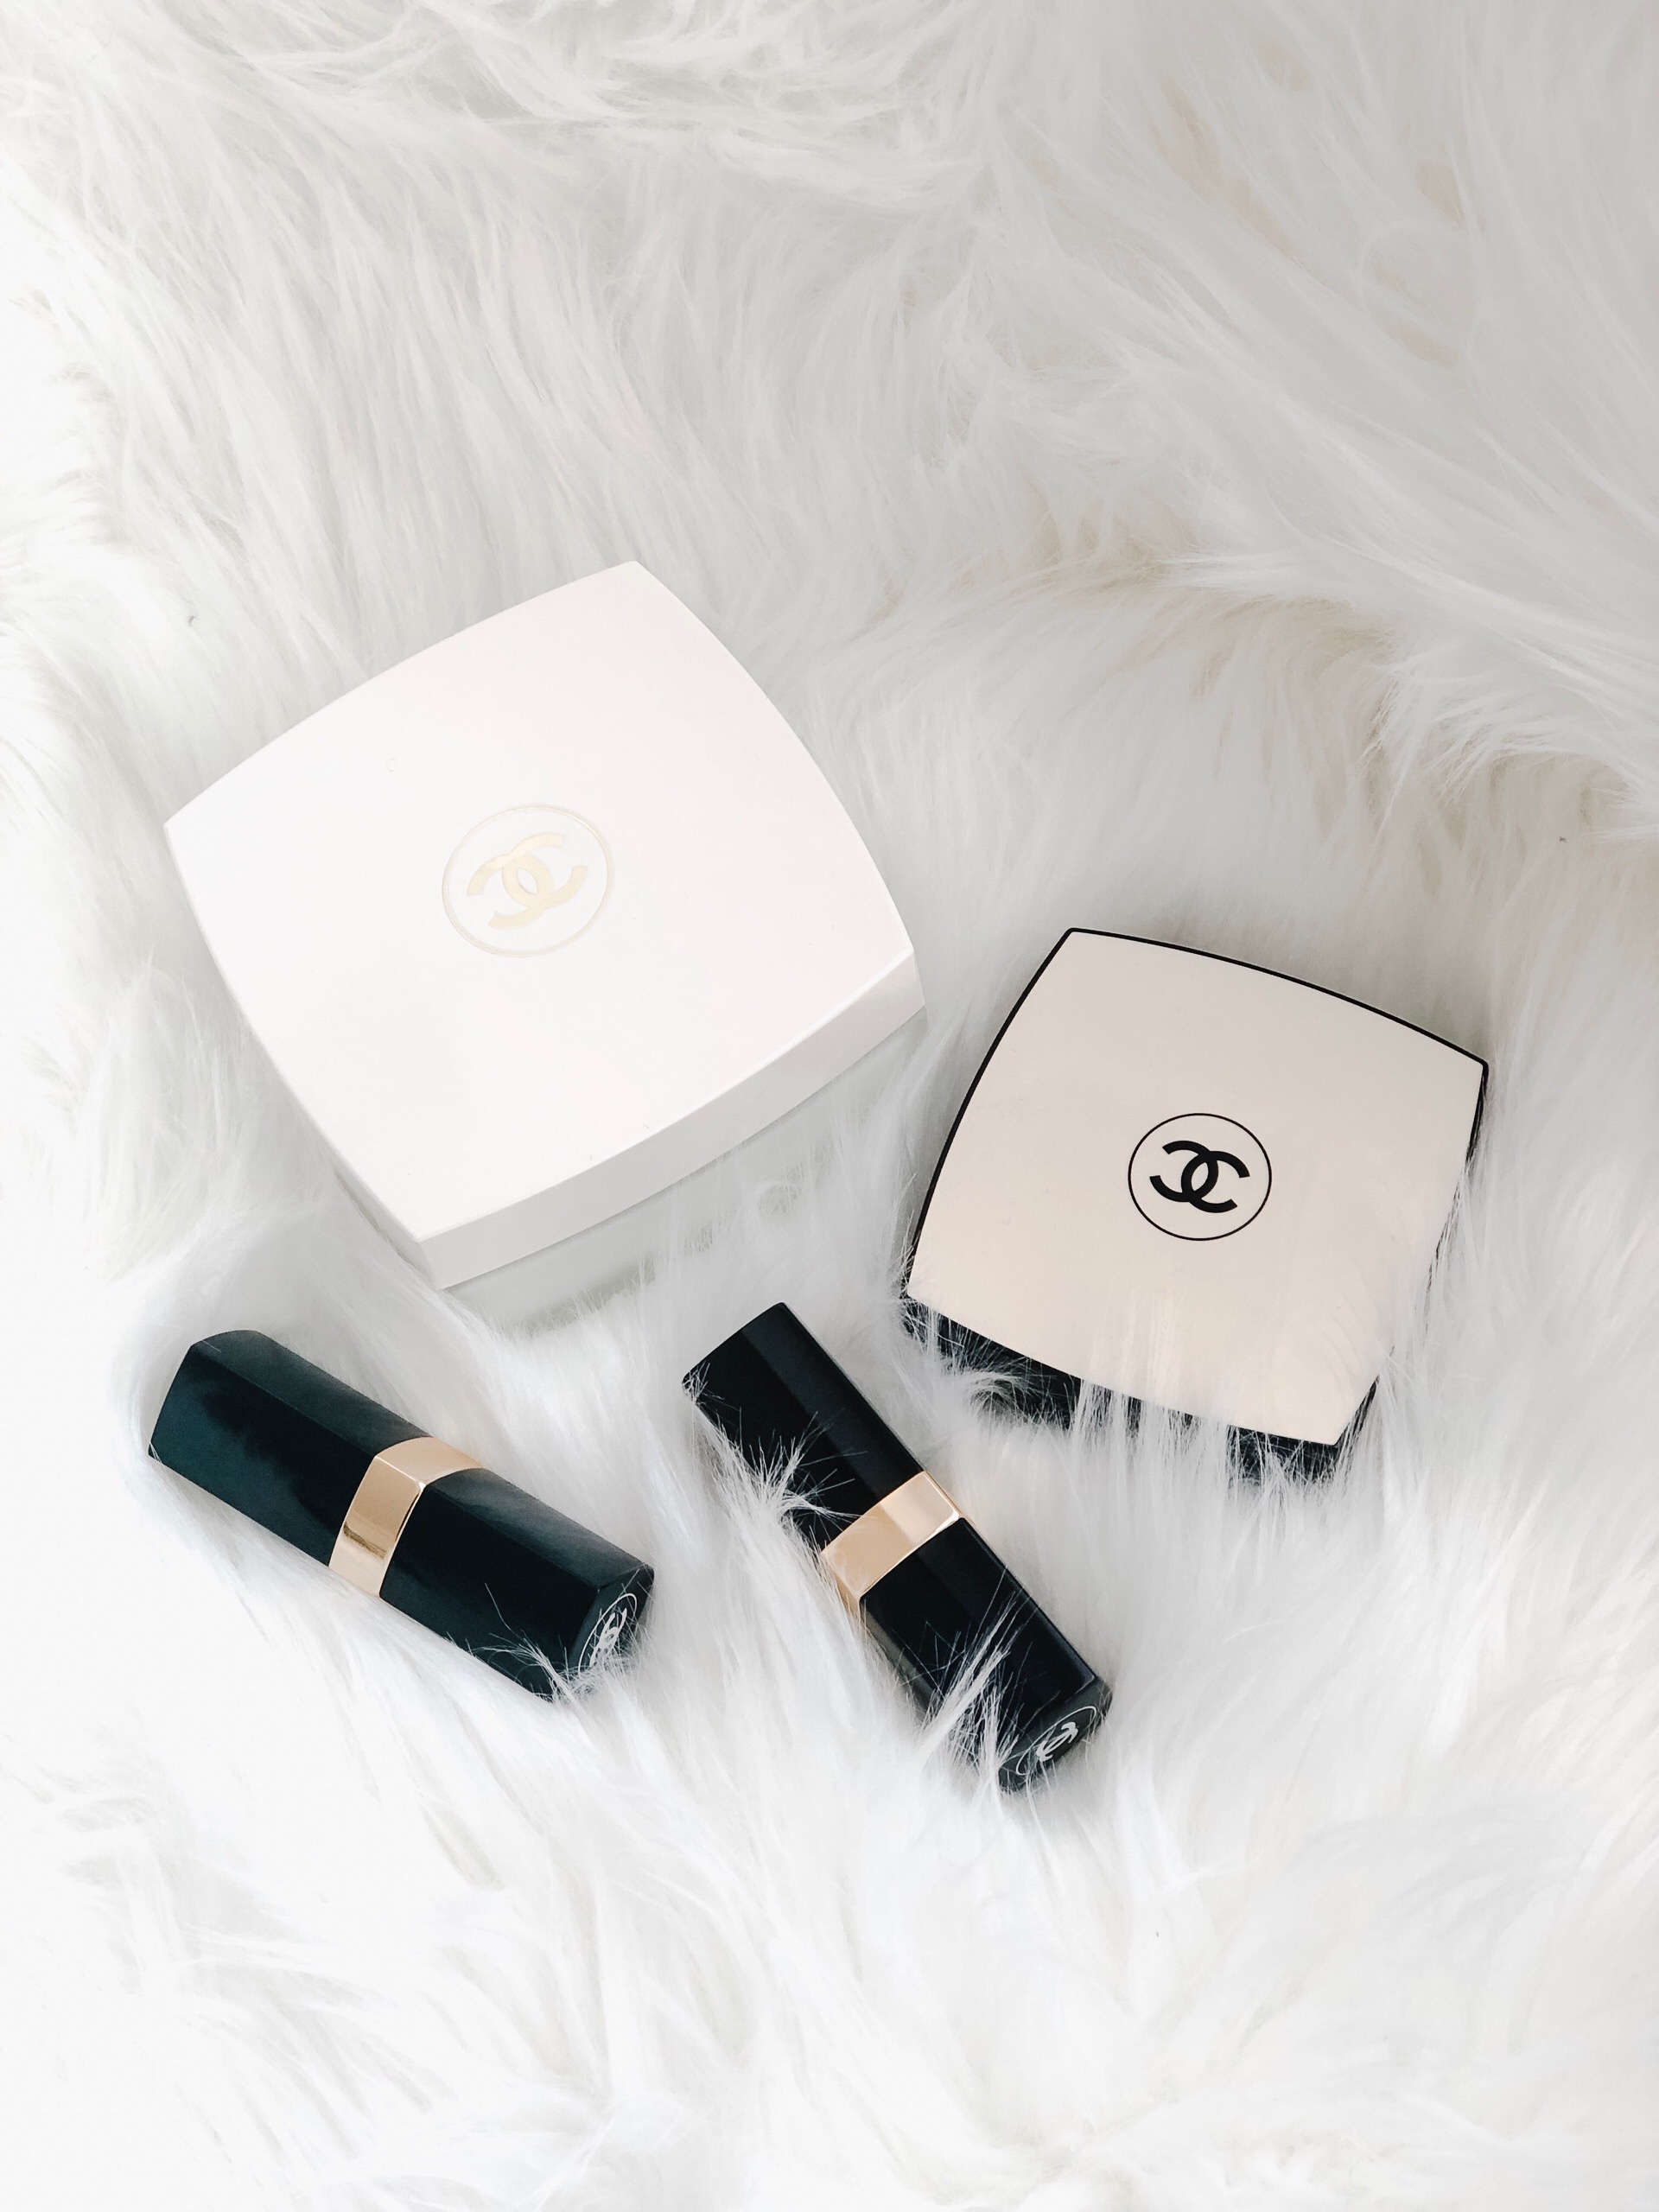 Chanel, Personal Luxuries.